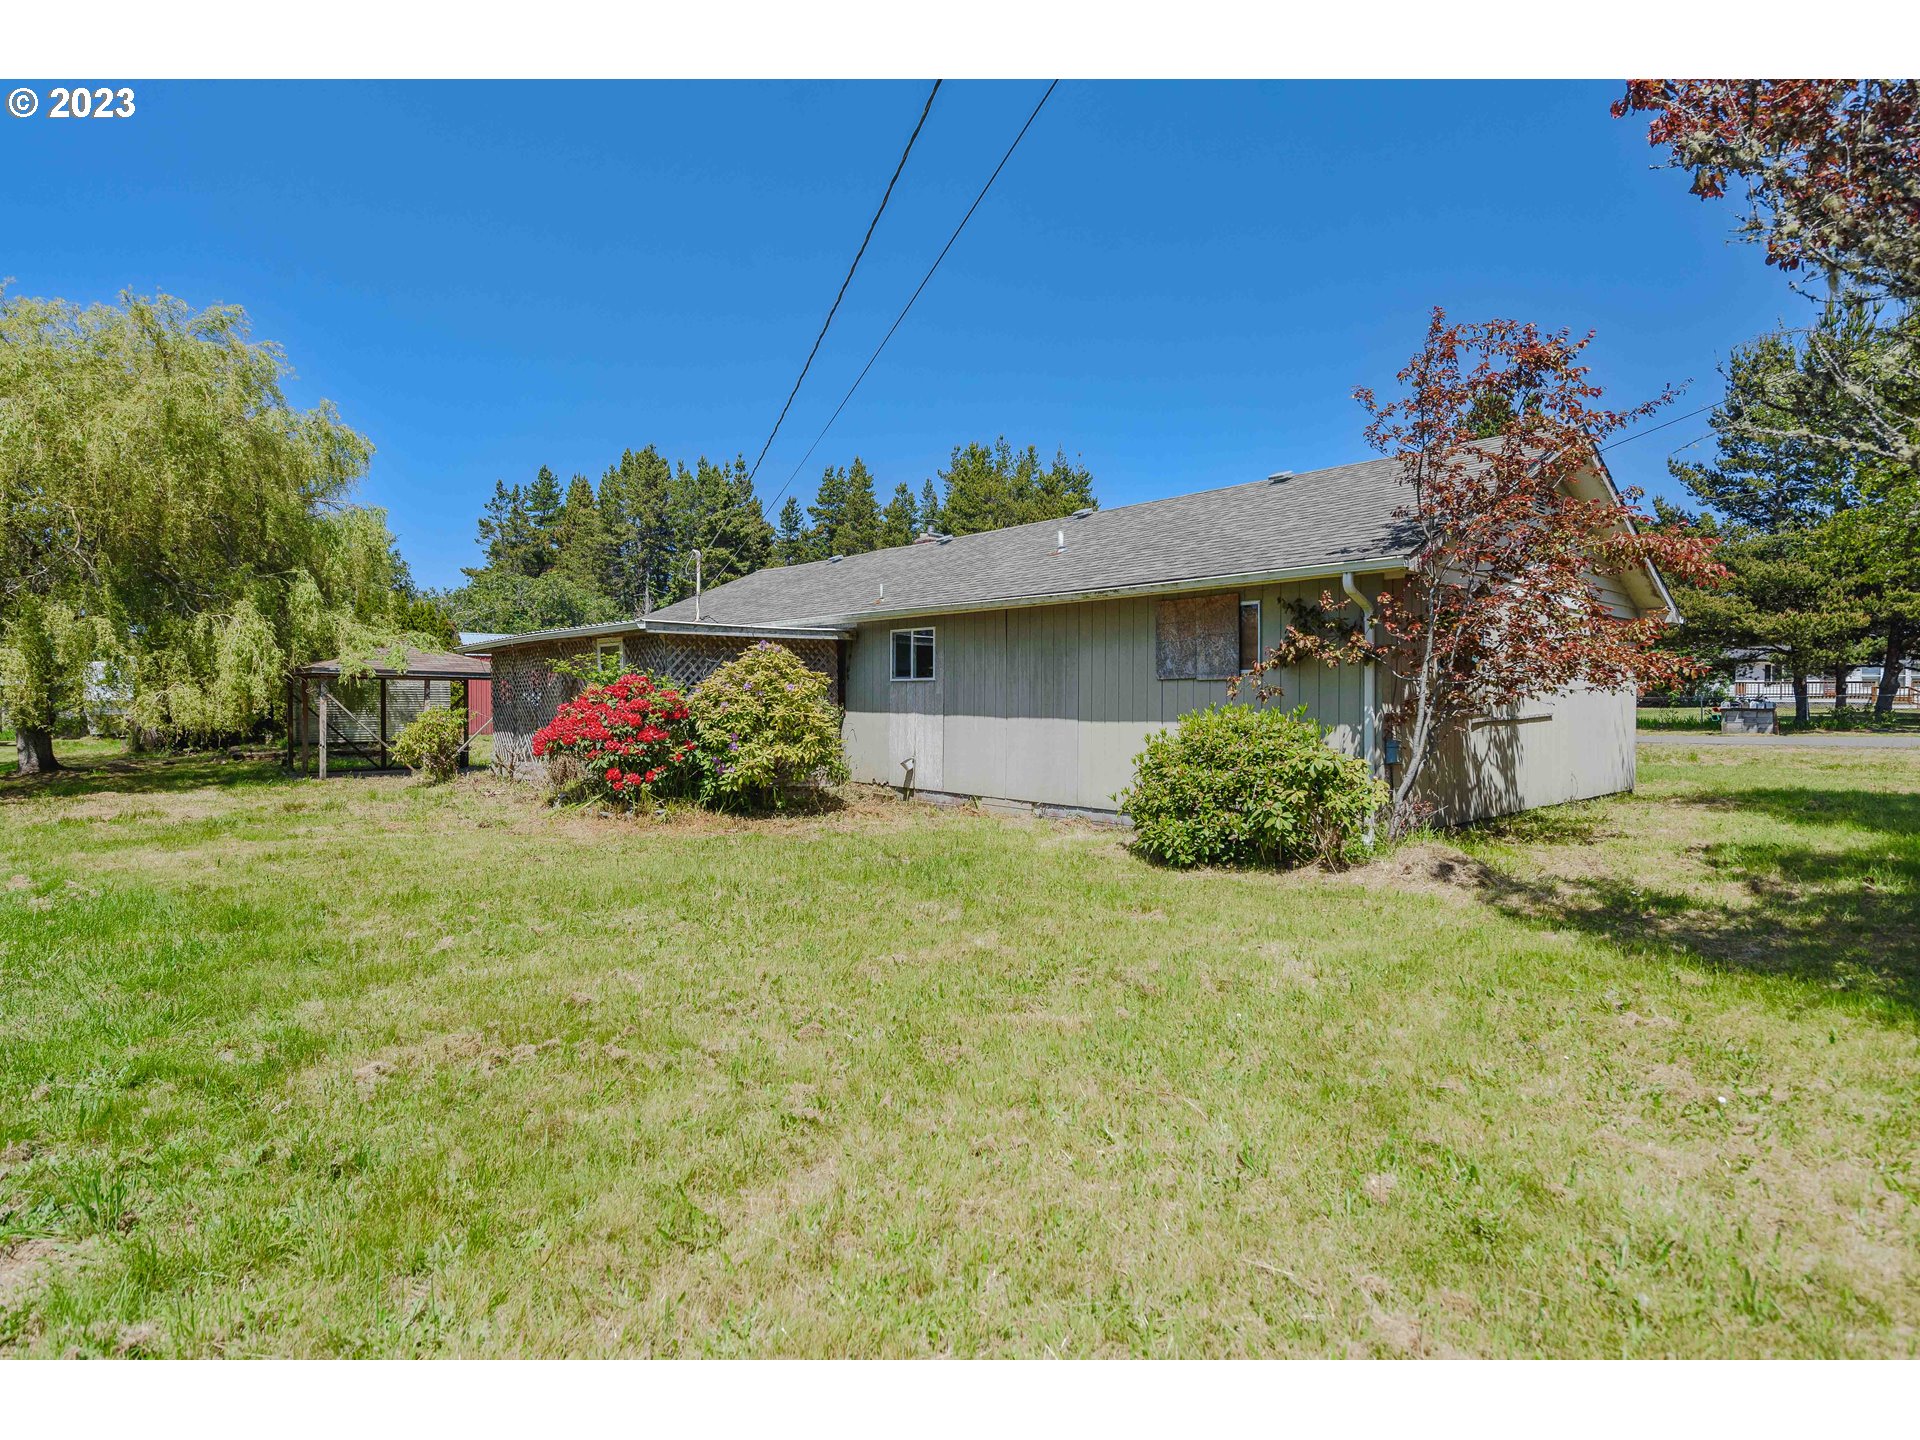 63680 WALLACE RD, Coos Bay, OR 97420